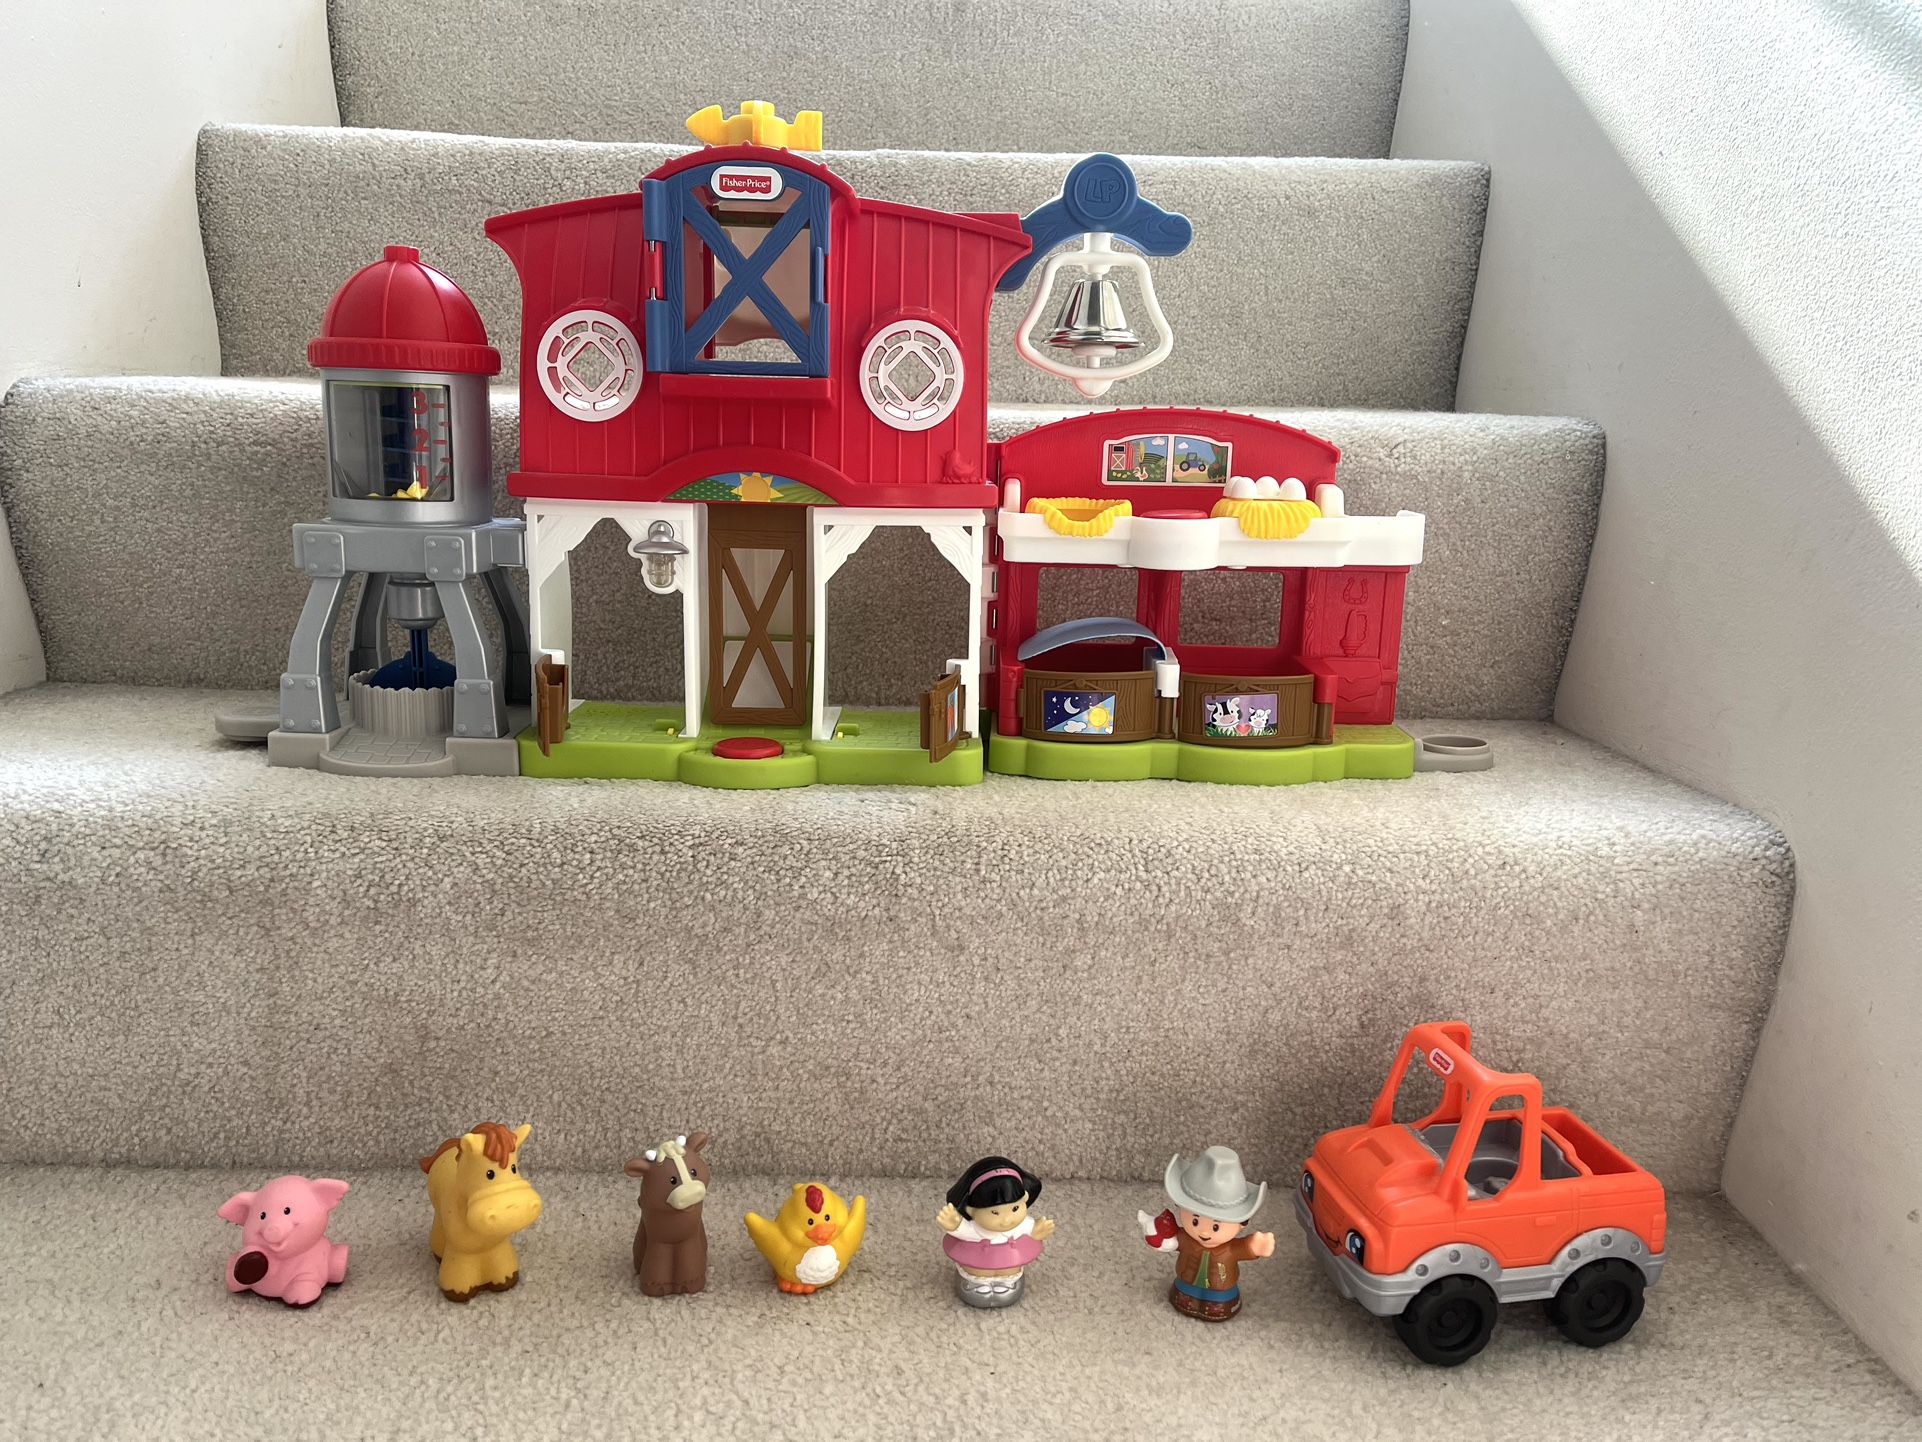 Fisher Price Little People Farm With Animals & Truck. Farm Has Sounds & Lights ($25)